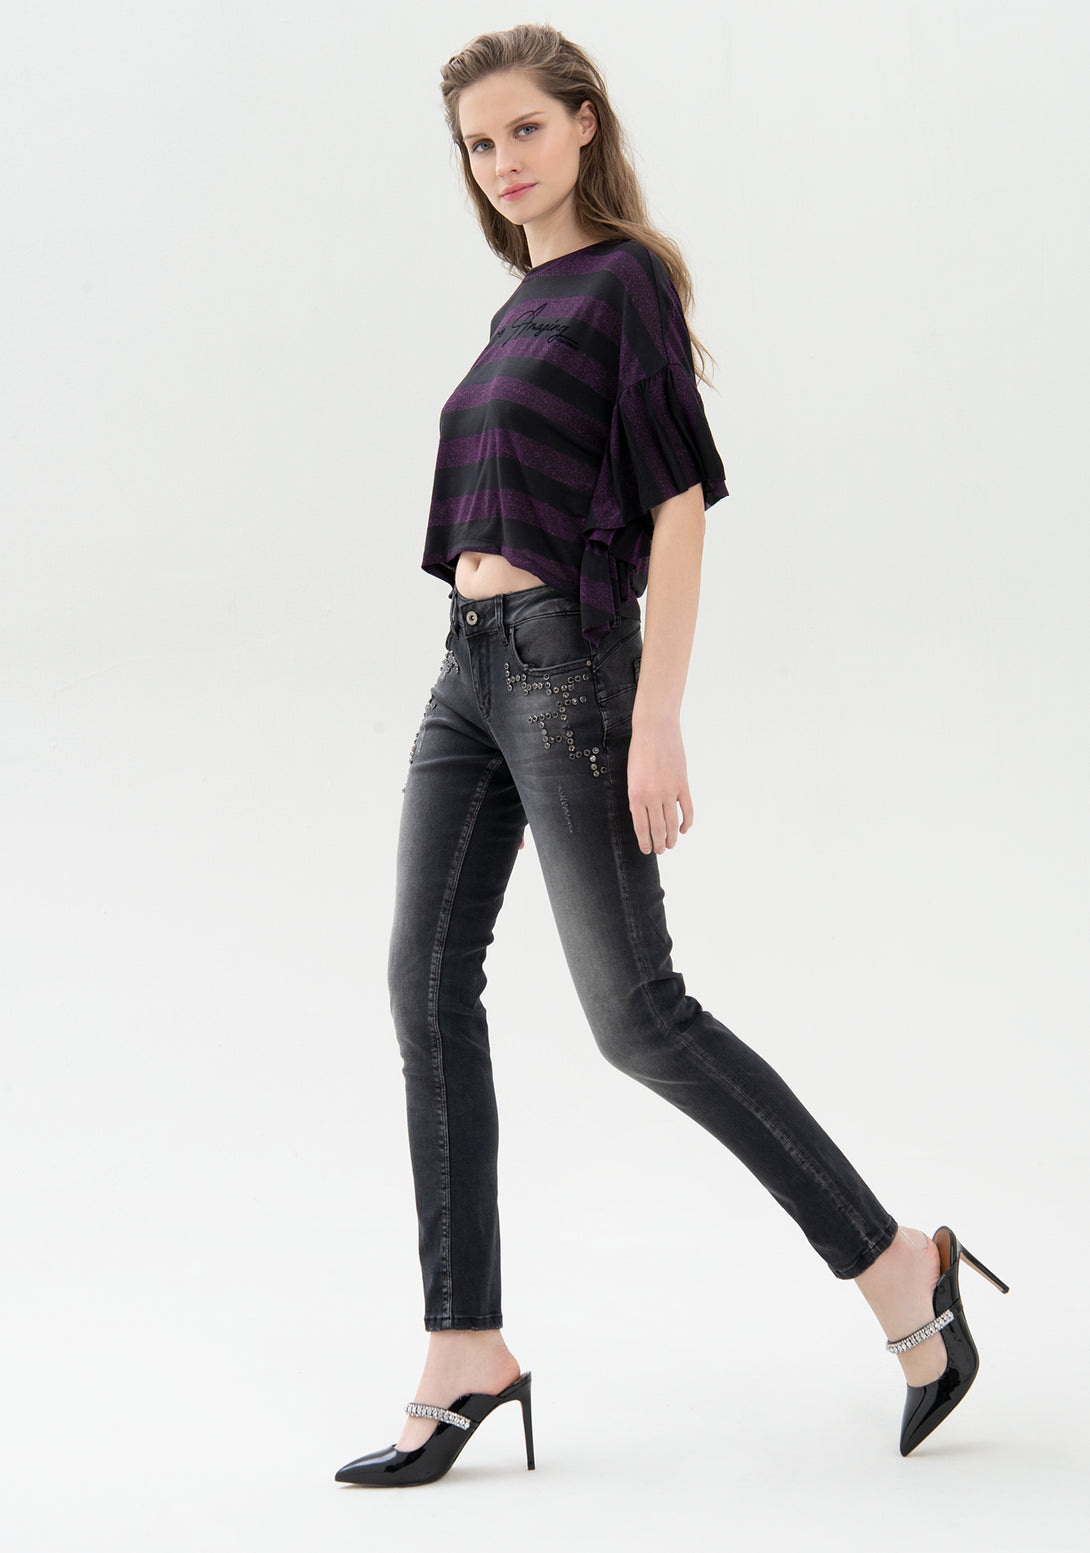 Jeans skinny fit with push-up effect made in black denim with dark wash